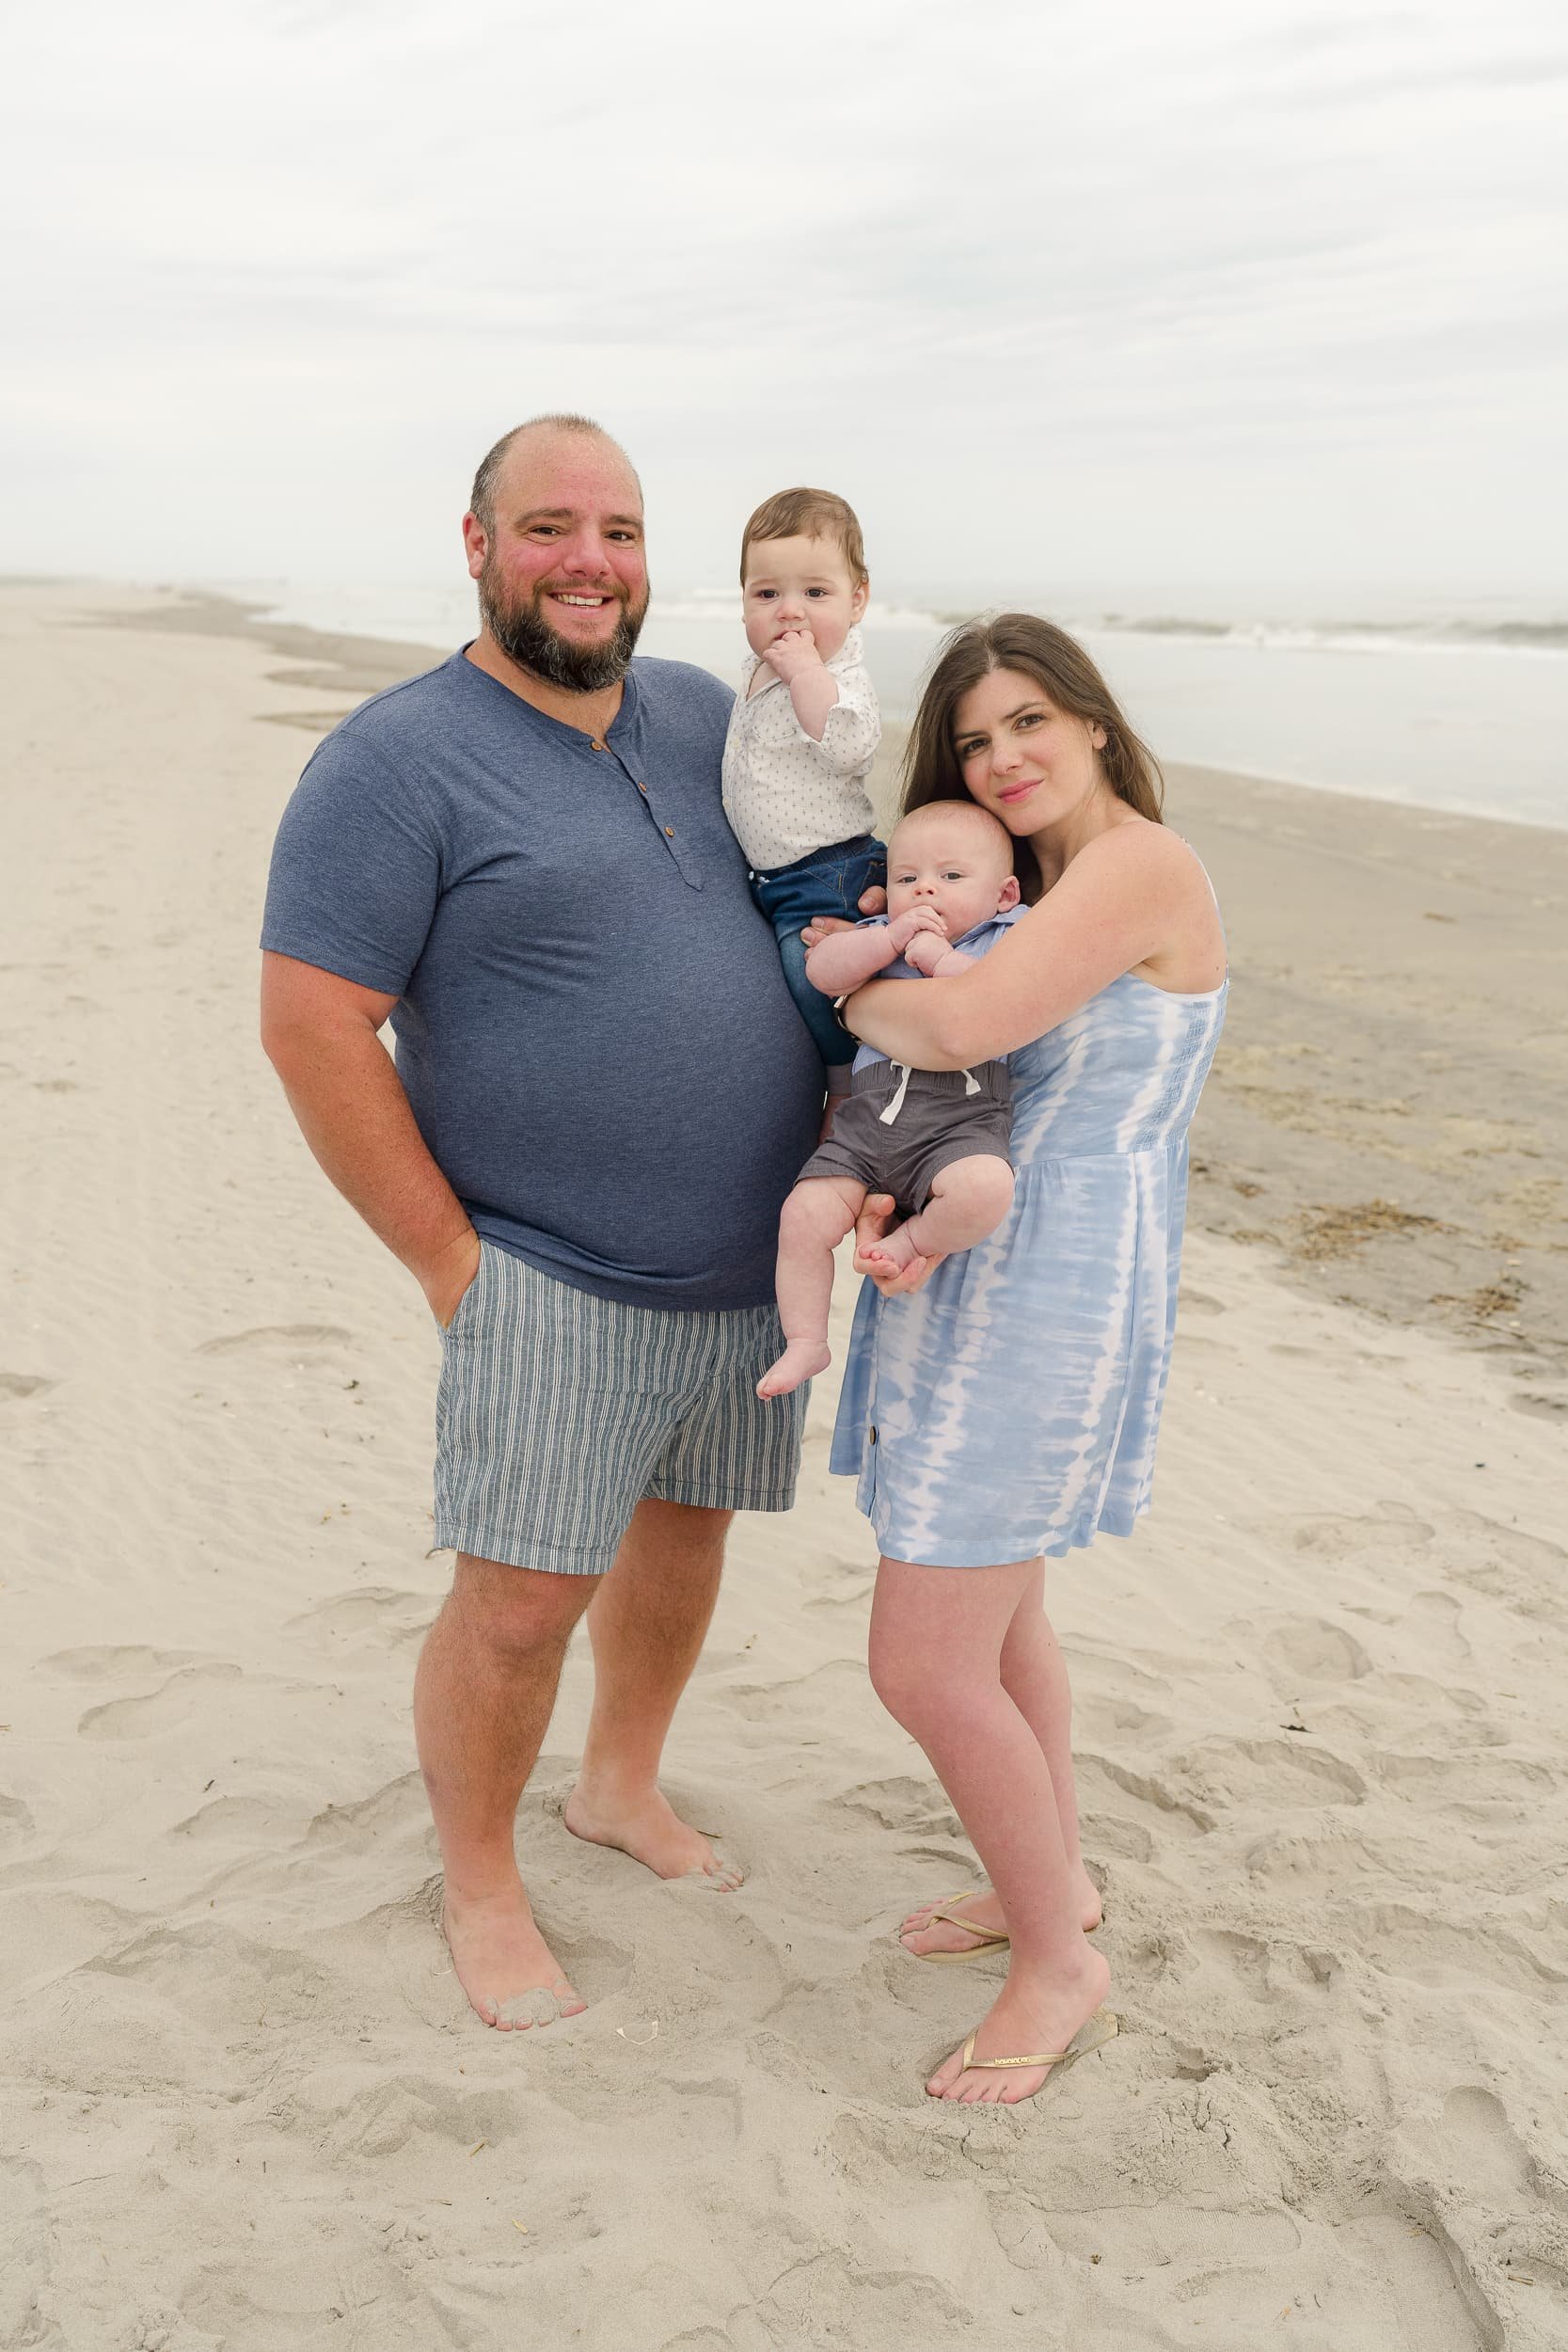 A brother and sister pose each with their newborn babies on the beach in New Jersey.